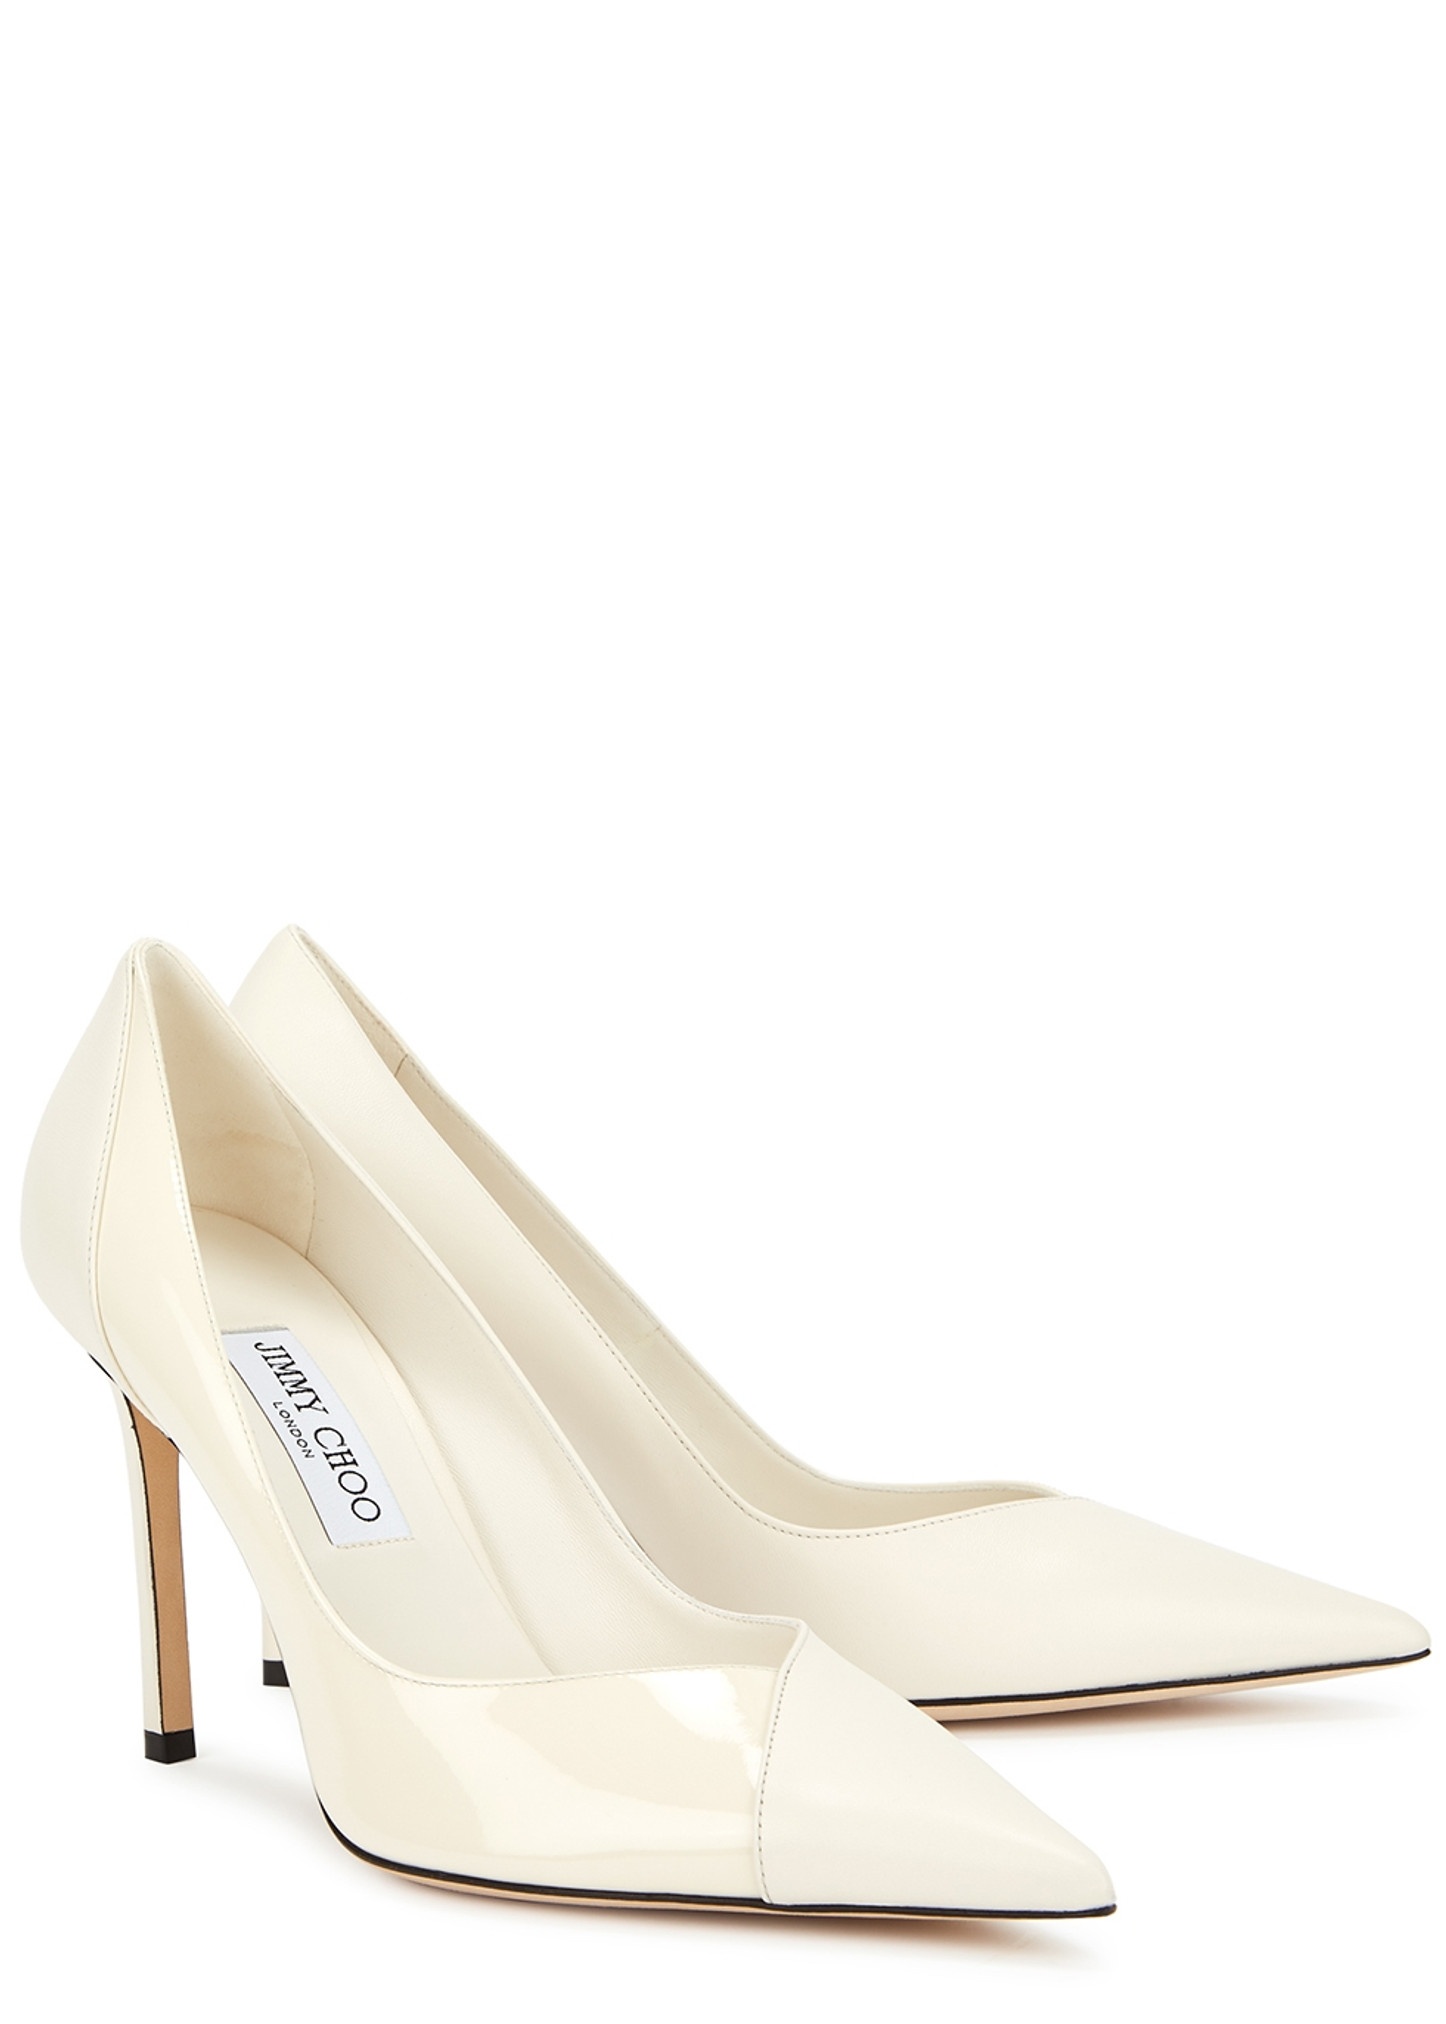 Cass 95 off-white leather pumps - 2